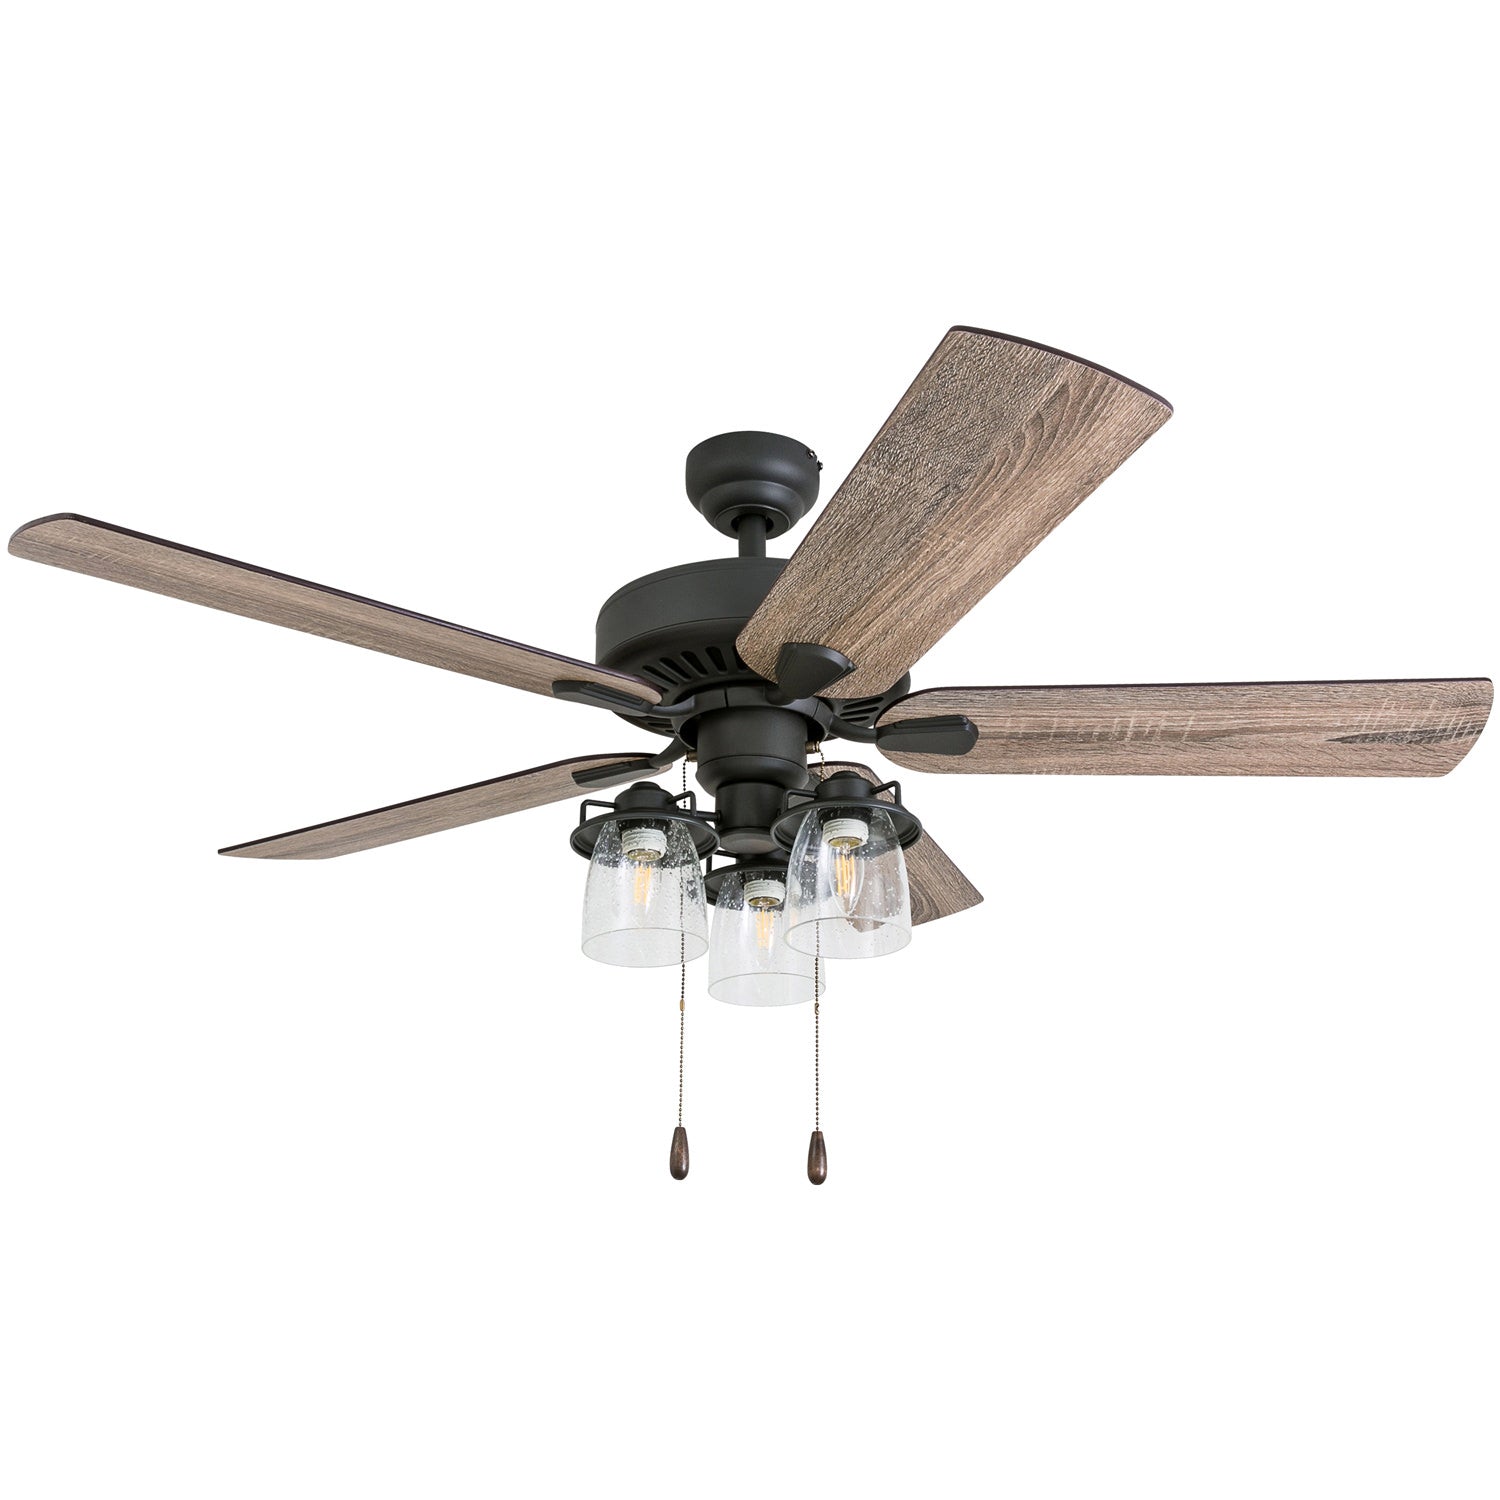 52 Inch Briarcrest, Bronze, Remote Control, Ceiling Fan by Prominence Home